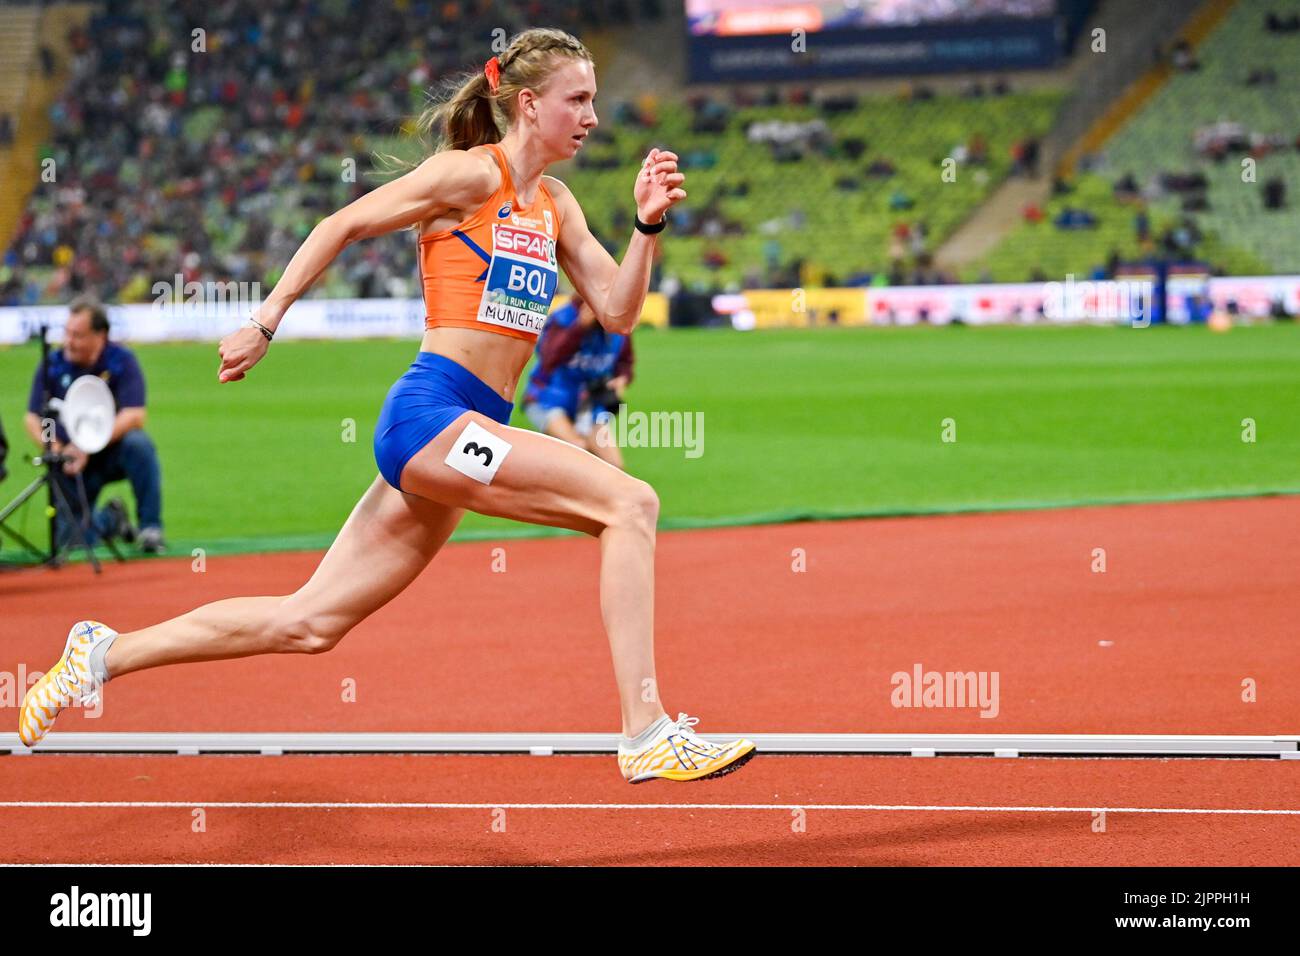 MUNCHEN, GERMANY - AUGUST 19: Femke Bol of the Netherlands competing in Women's 400m Hurdles at the European Championships Munich 2022 at the Olympiastadion on August 19, 2022 in Munchen, Germany (Photo by Andy Astfalck/BSR Agency) Stock Photo